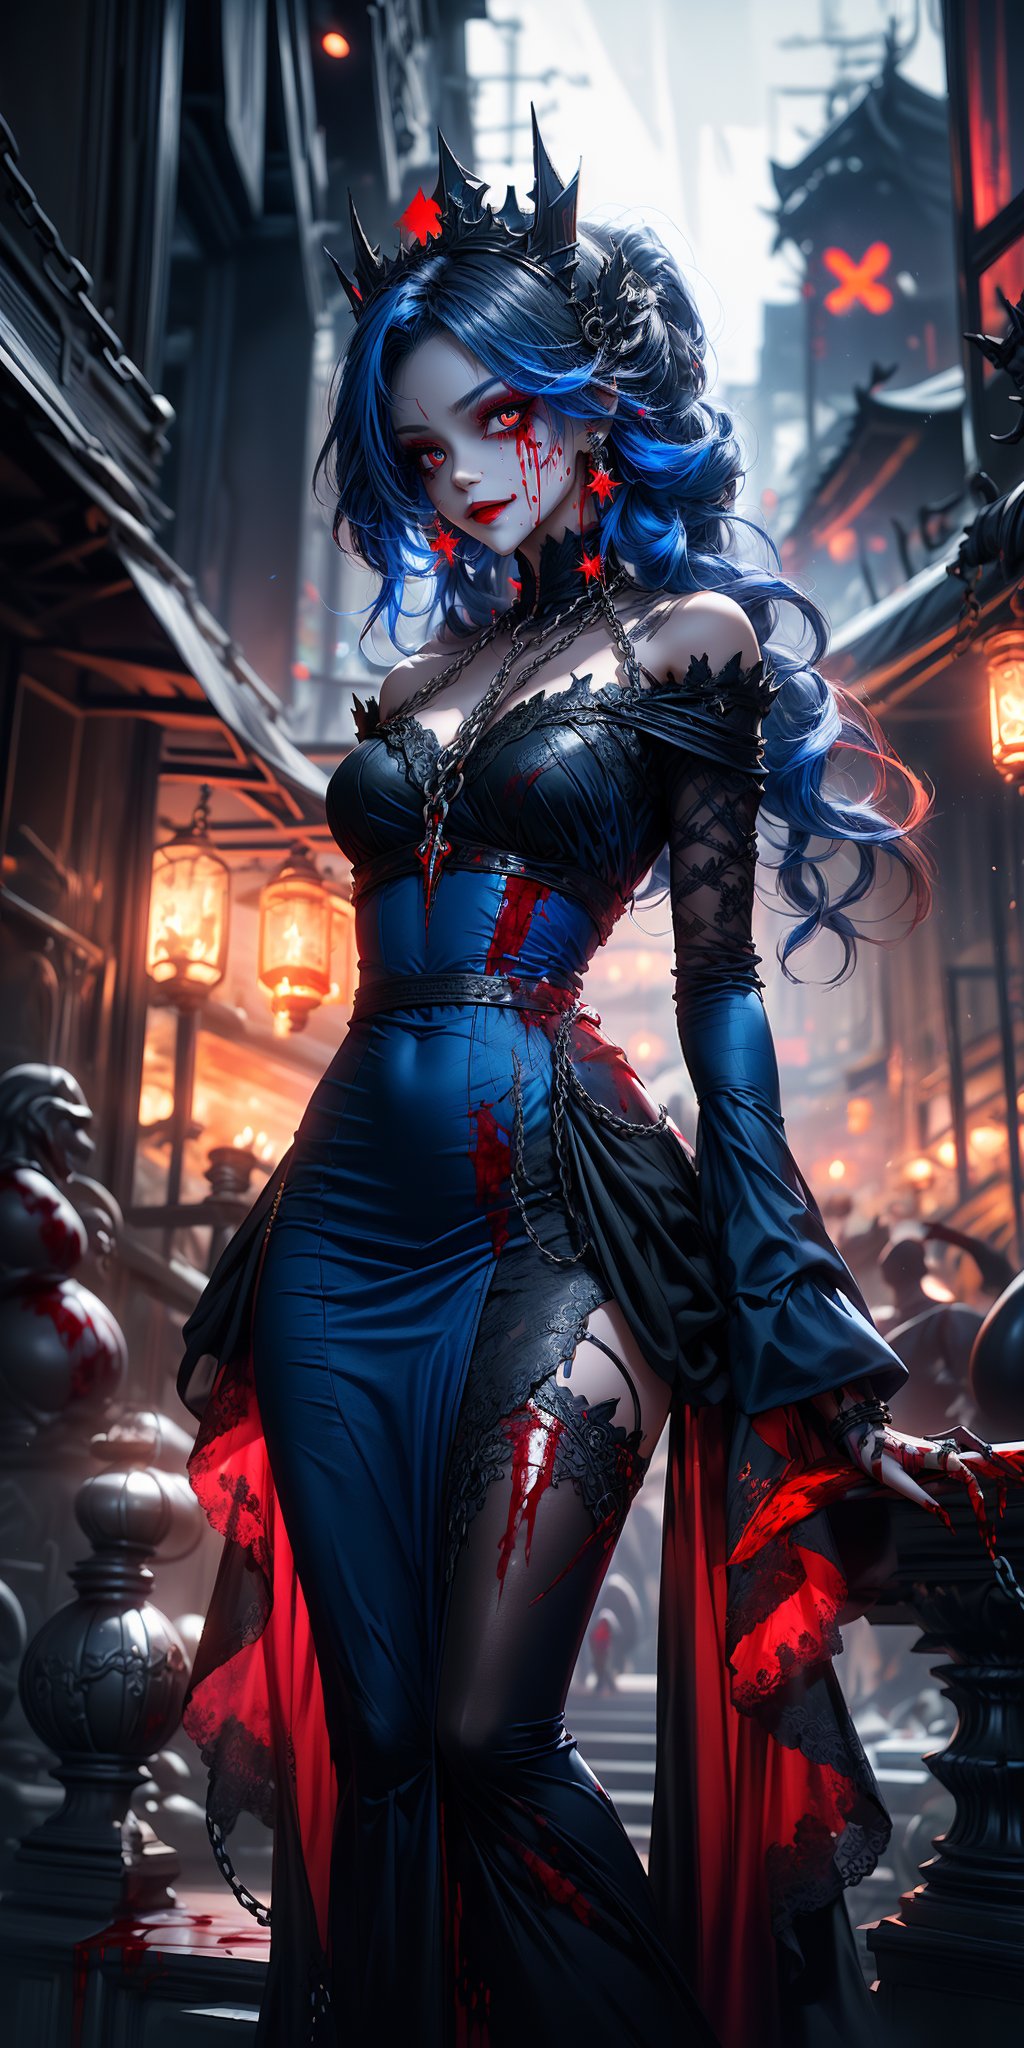  (masterpiece, best quality:1.3), (8k wallpaper), (detailed beautiful face and eyes), (detailed illustration), (super fine illustration), (vibrant colors), (professional lighting), 
One girl, (long blue hair, red blood eyes, evil smile), chlotes (red/blue/black elegant dress with worn parts:1.8), crown(black:1.8, with blood:1.8), background (lost castle:1.8, chains:1.8, darkness:1.8 ,ghosts, flying blue flames:1.8, scary night),girl